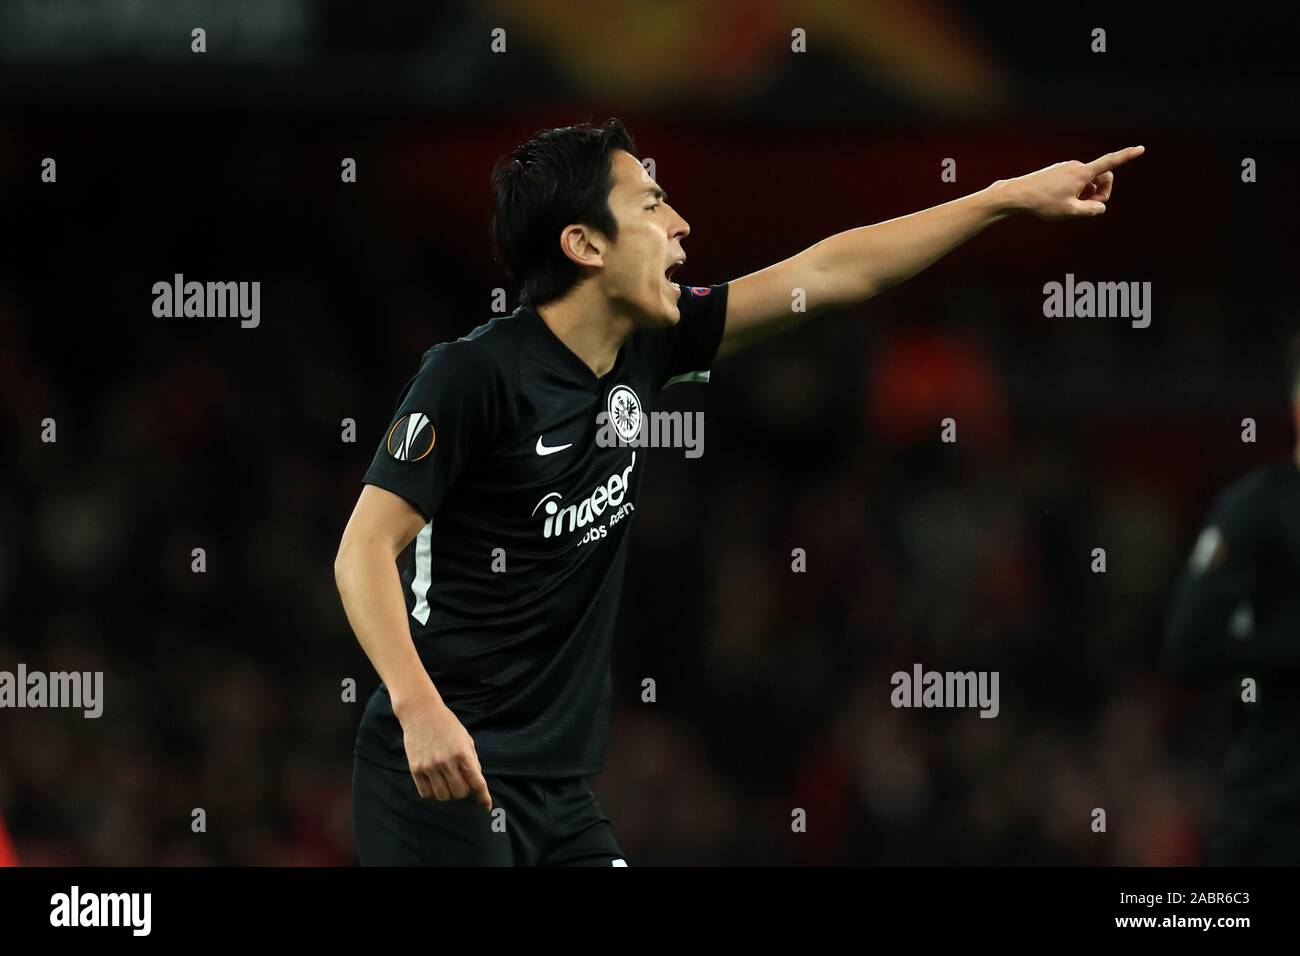 London, UK. 28th November, 2019. Makoto Hasebe of Eintracht Frankfurt during the UEFA Europa League match between Arsenal and Eintracht Frankfurt at the Emirates Stadium, London on Thursday 28th November 2019. (Credit: Leila Coker | MI News) Photograph may only be used for newspaper and/or magazine editorial purposes, license required for commercial use Credit: MI News & Sport /Alamy Live News Stock Photo